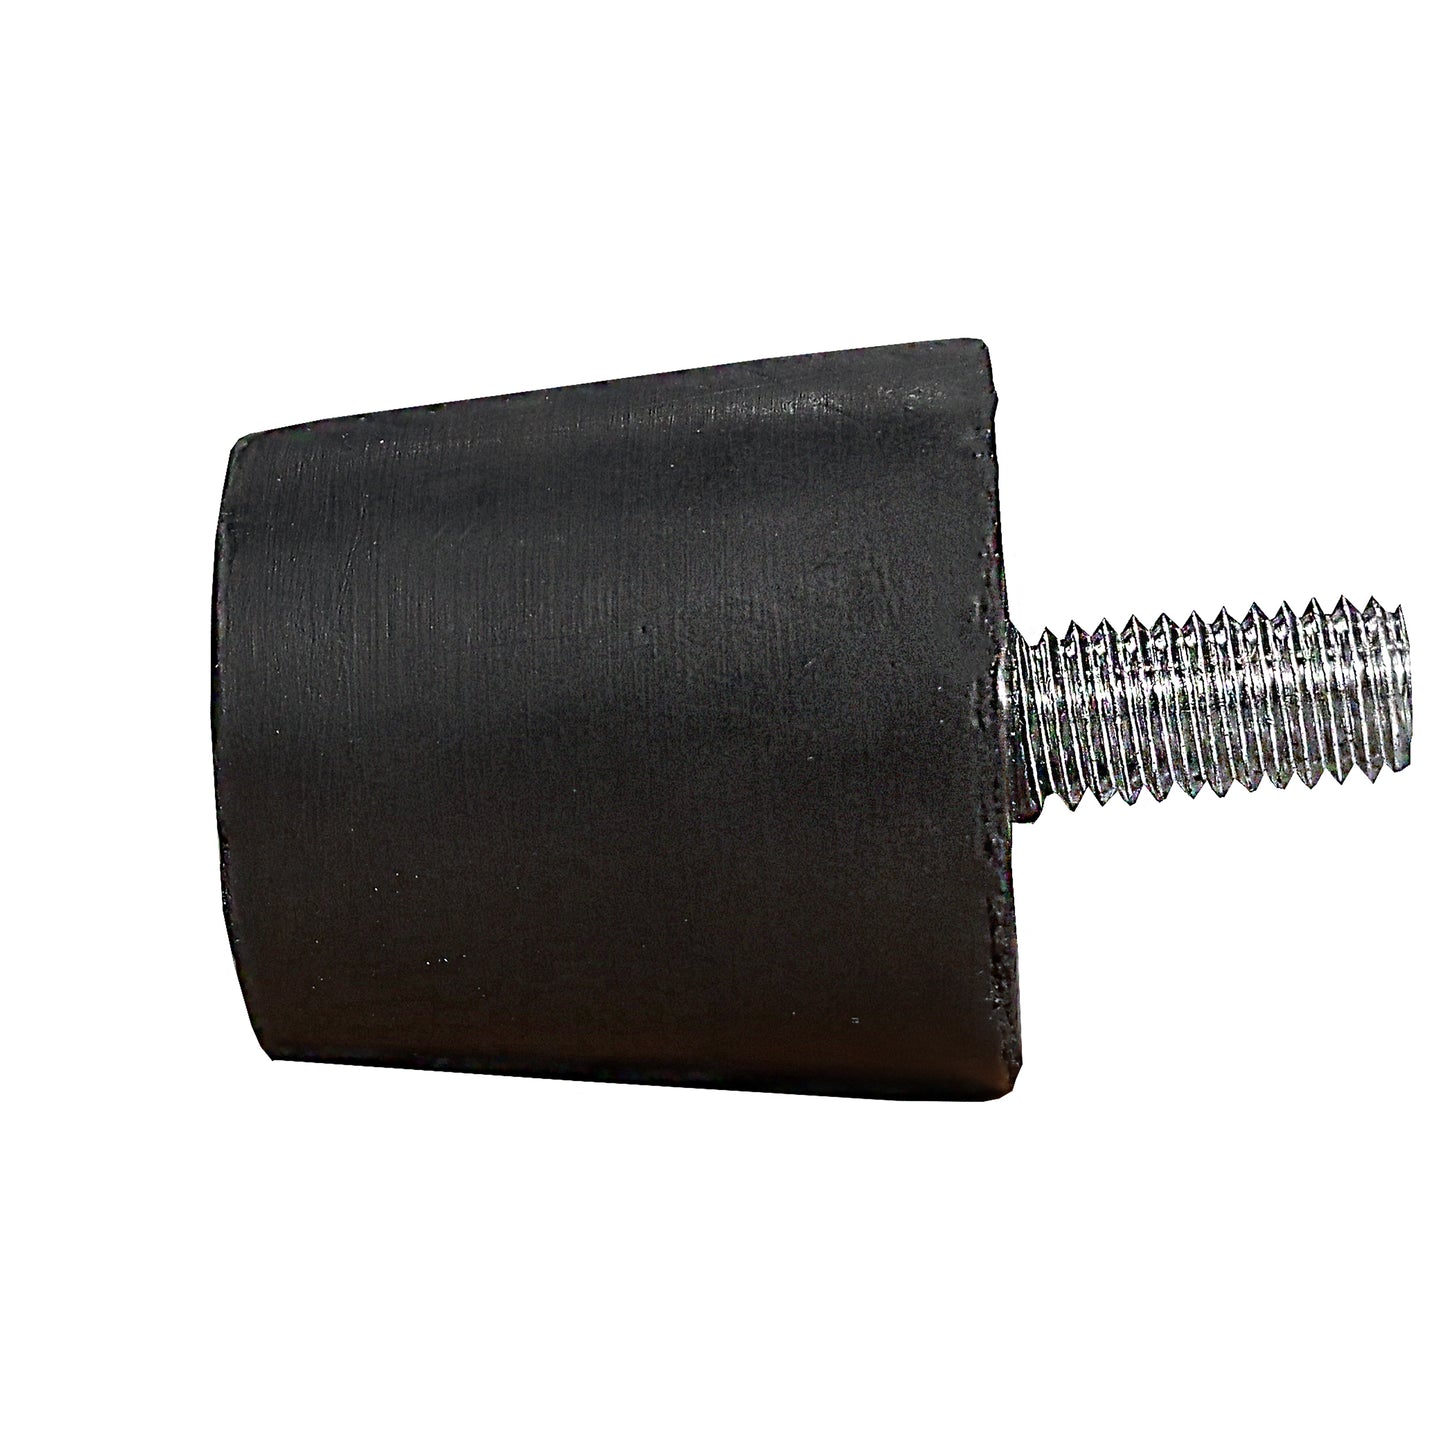 Weight Carriage Bump Stop for DF910 and DF830